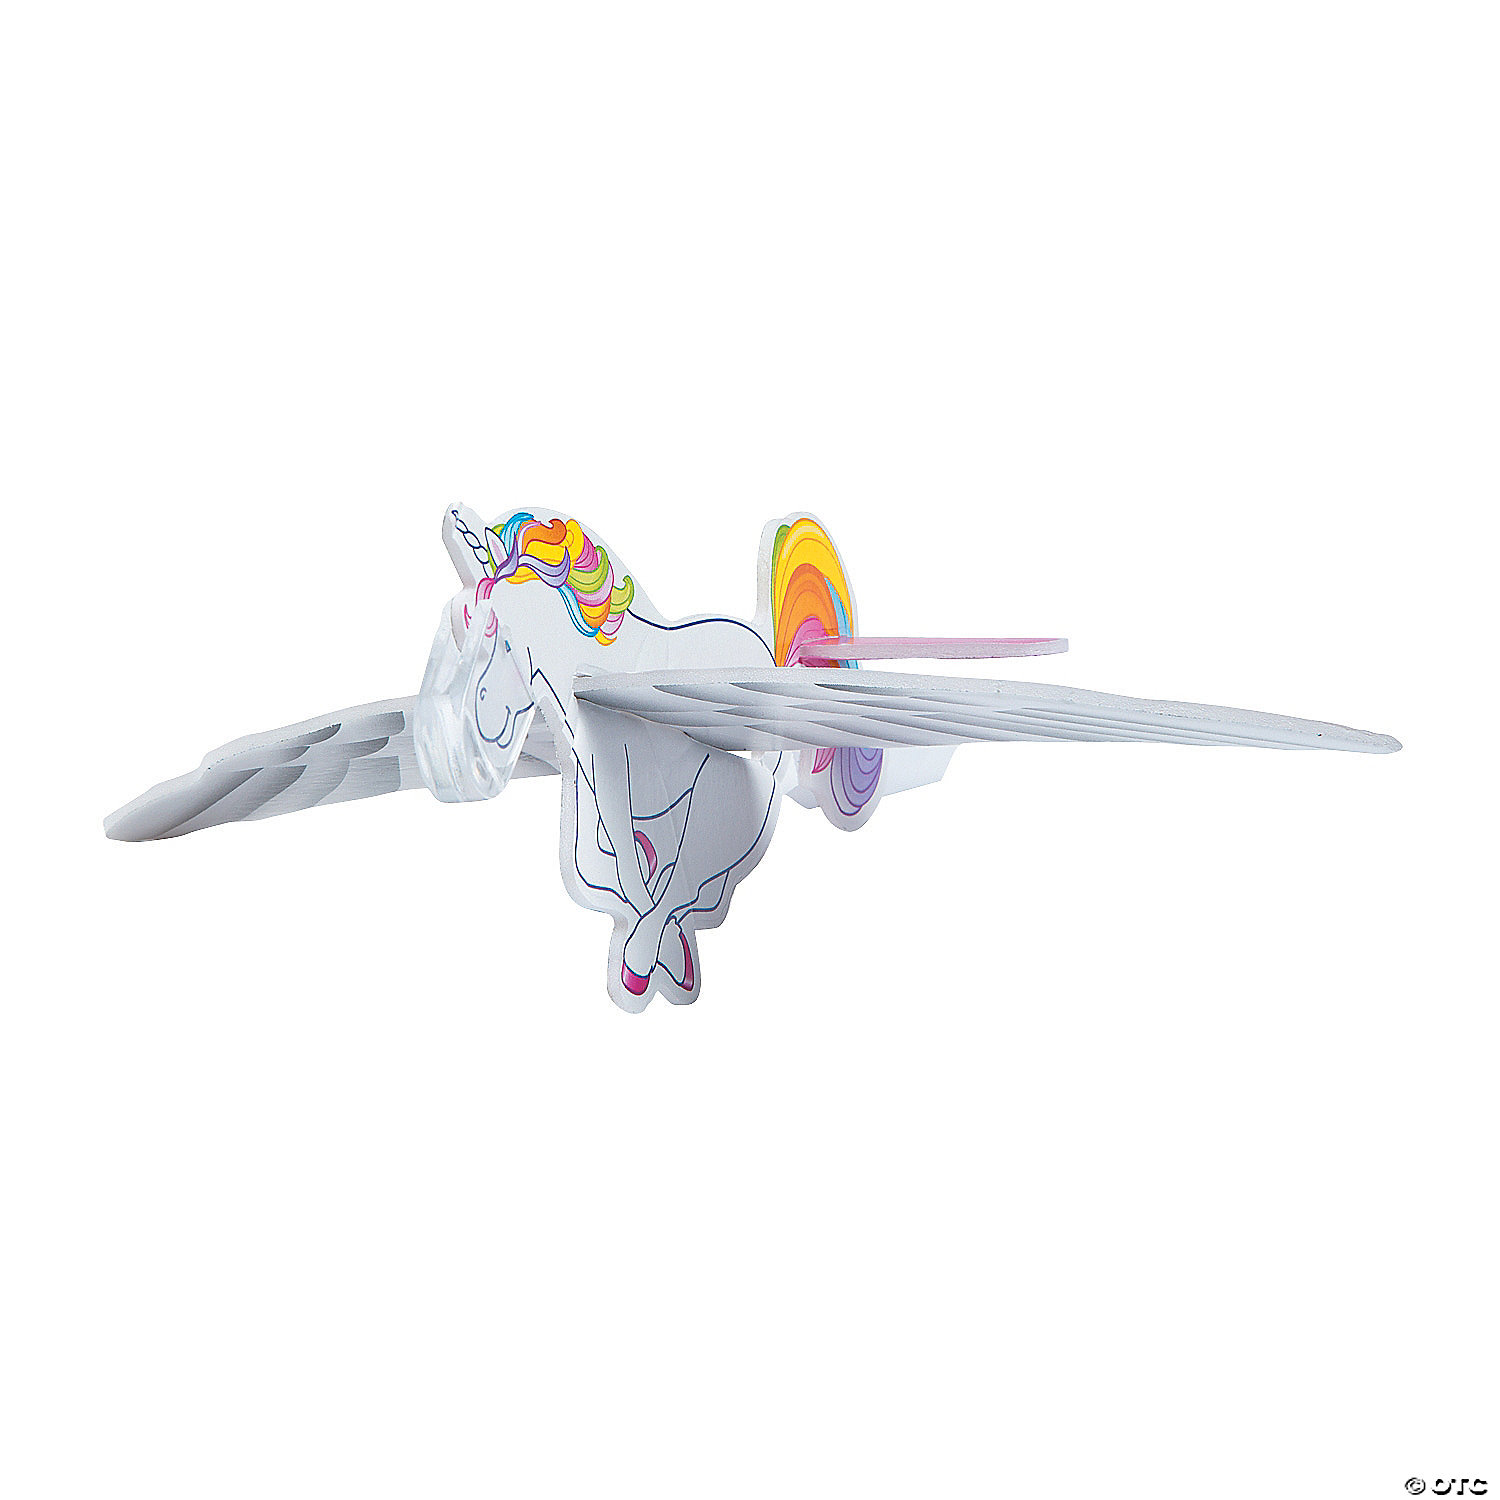 NEW 4 X FLYING UNICORN GLIDERS PLANES PARTY BAG FILLERS FAVOURS 